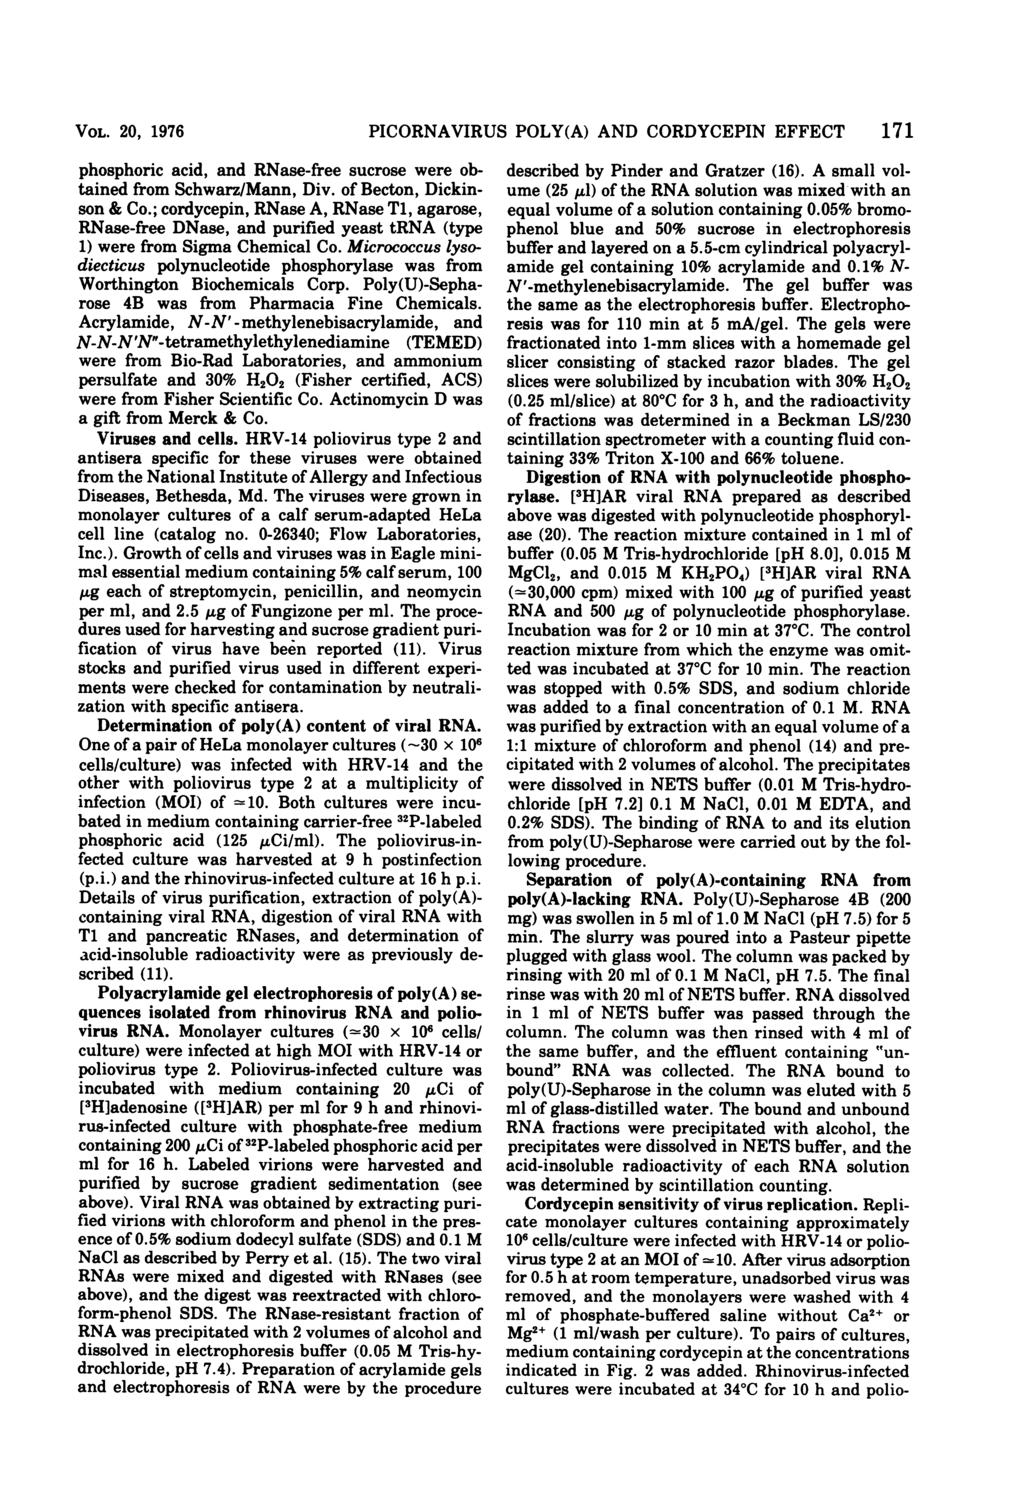 VOL. 20, 1976 phosphoric acid, and RNase-free sucrose were obtained from Schwarz/Mann, Div. of Becton, Dickinson & Co.